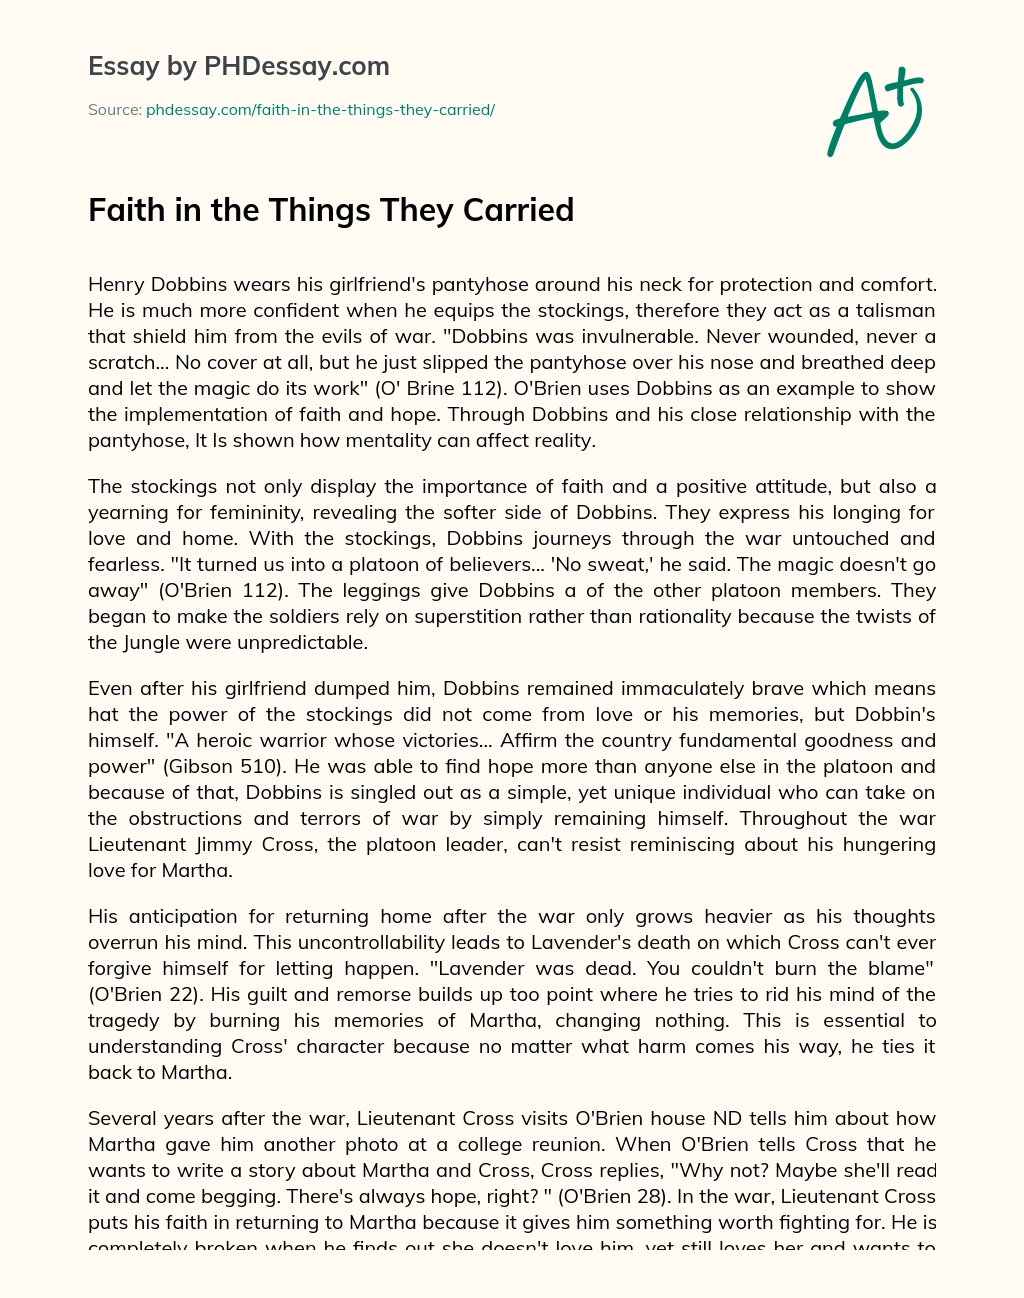 Faith in the Things They Carried essay